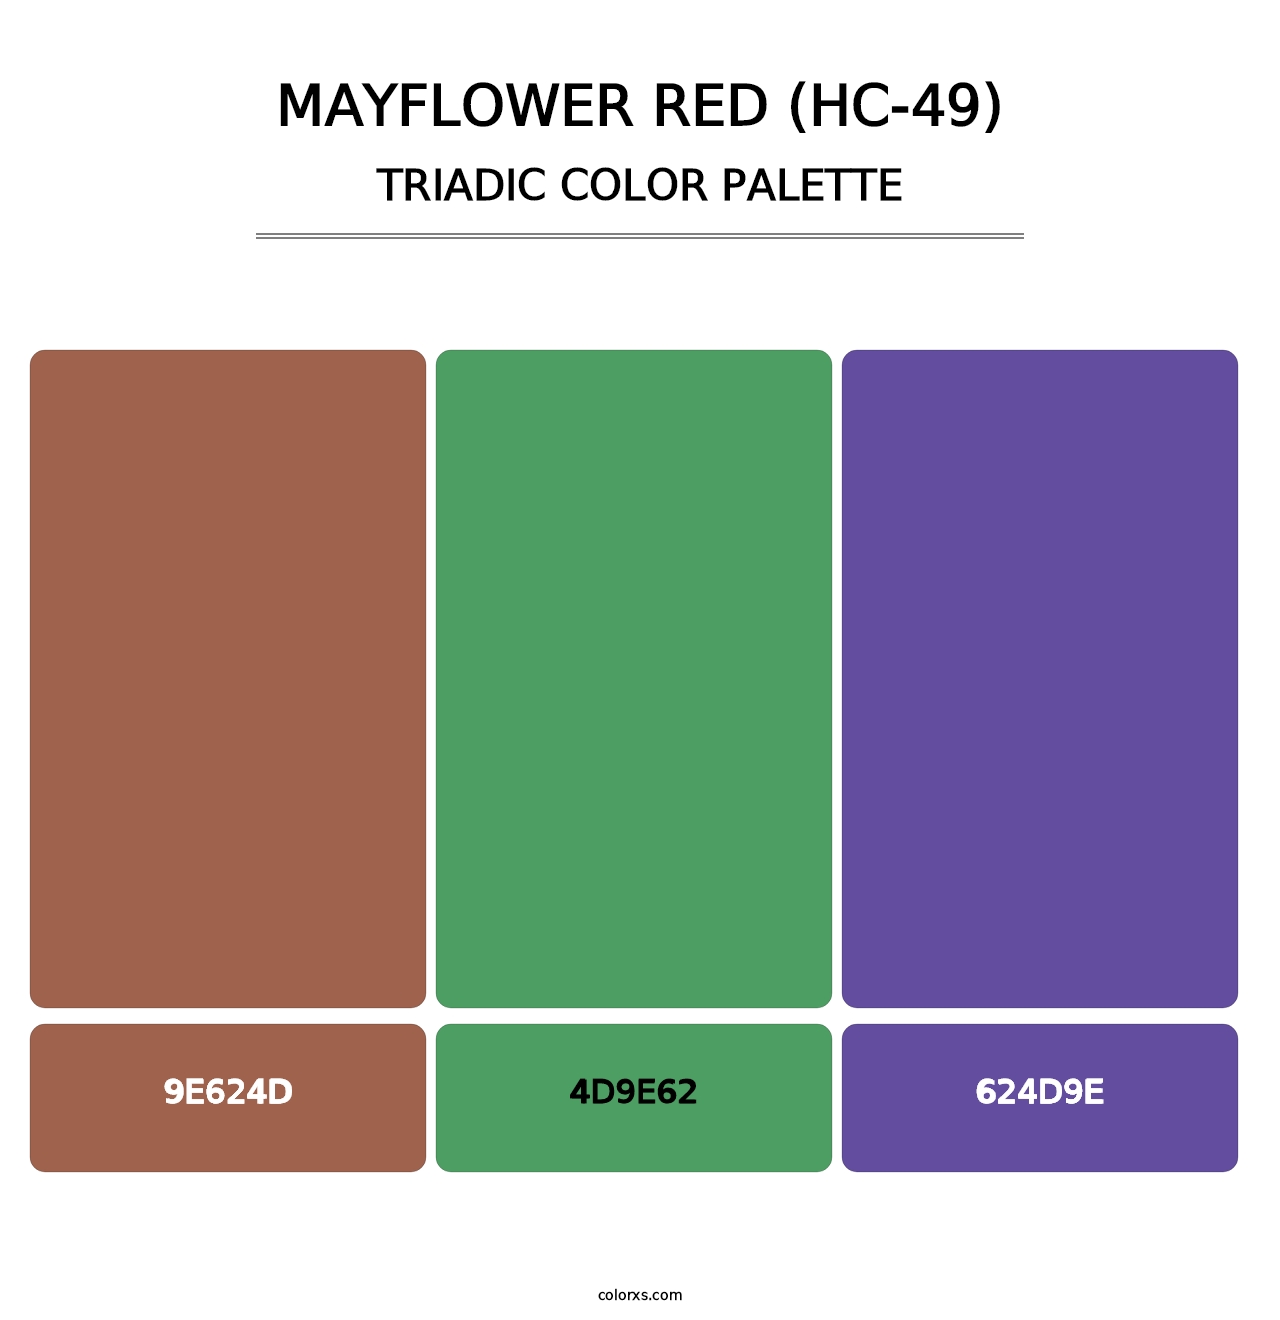 Mayflower Red (HC-49) - Triadic Color Palette